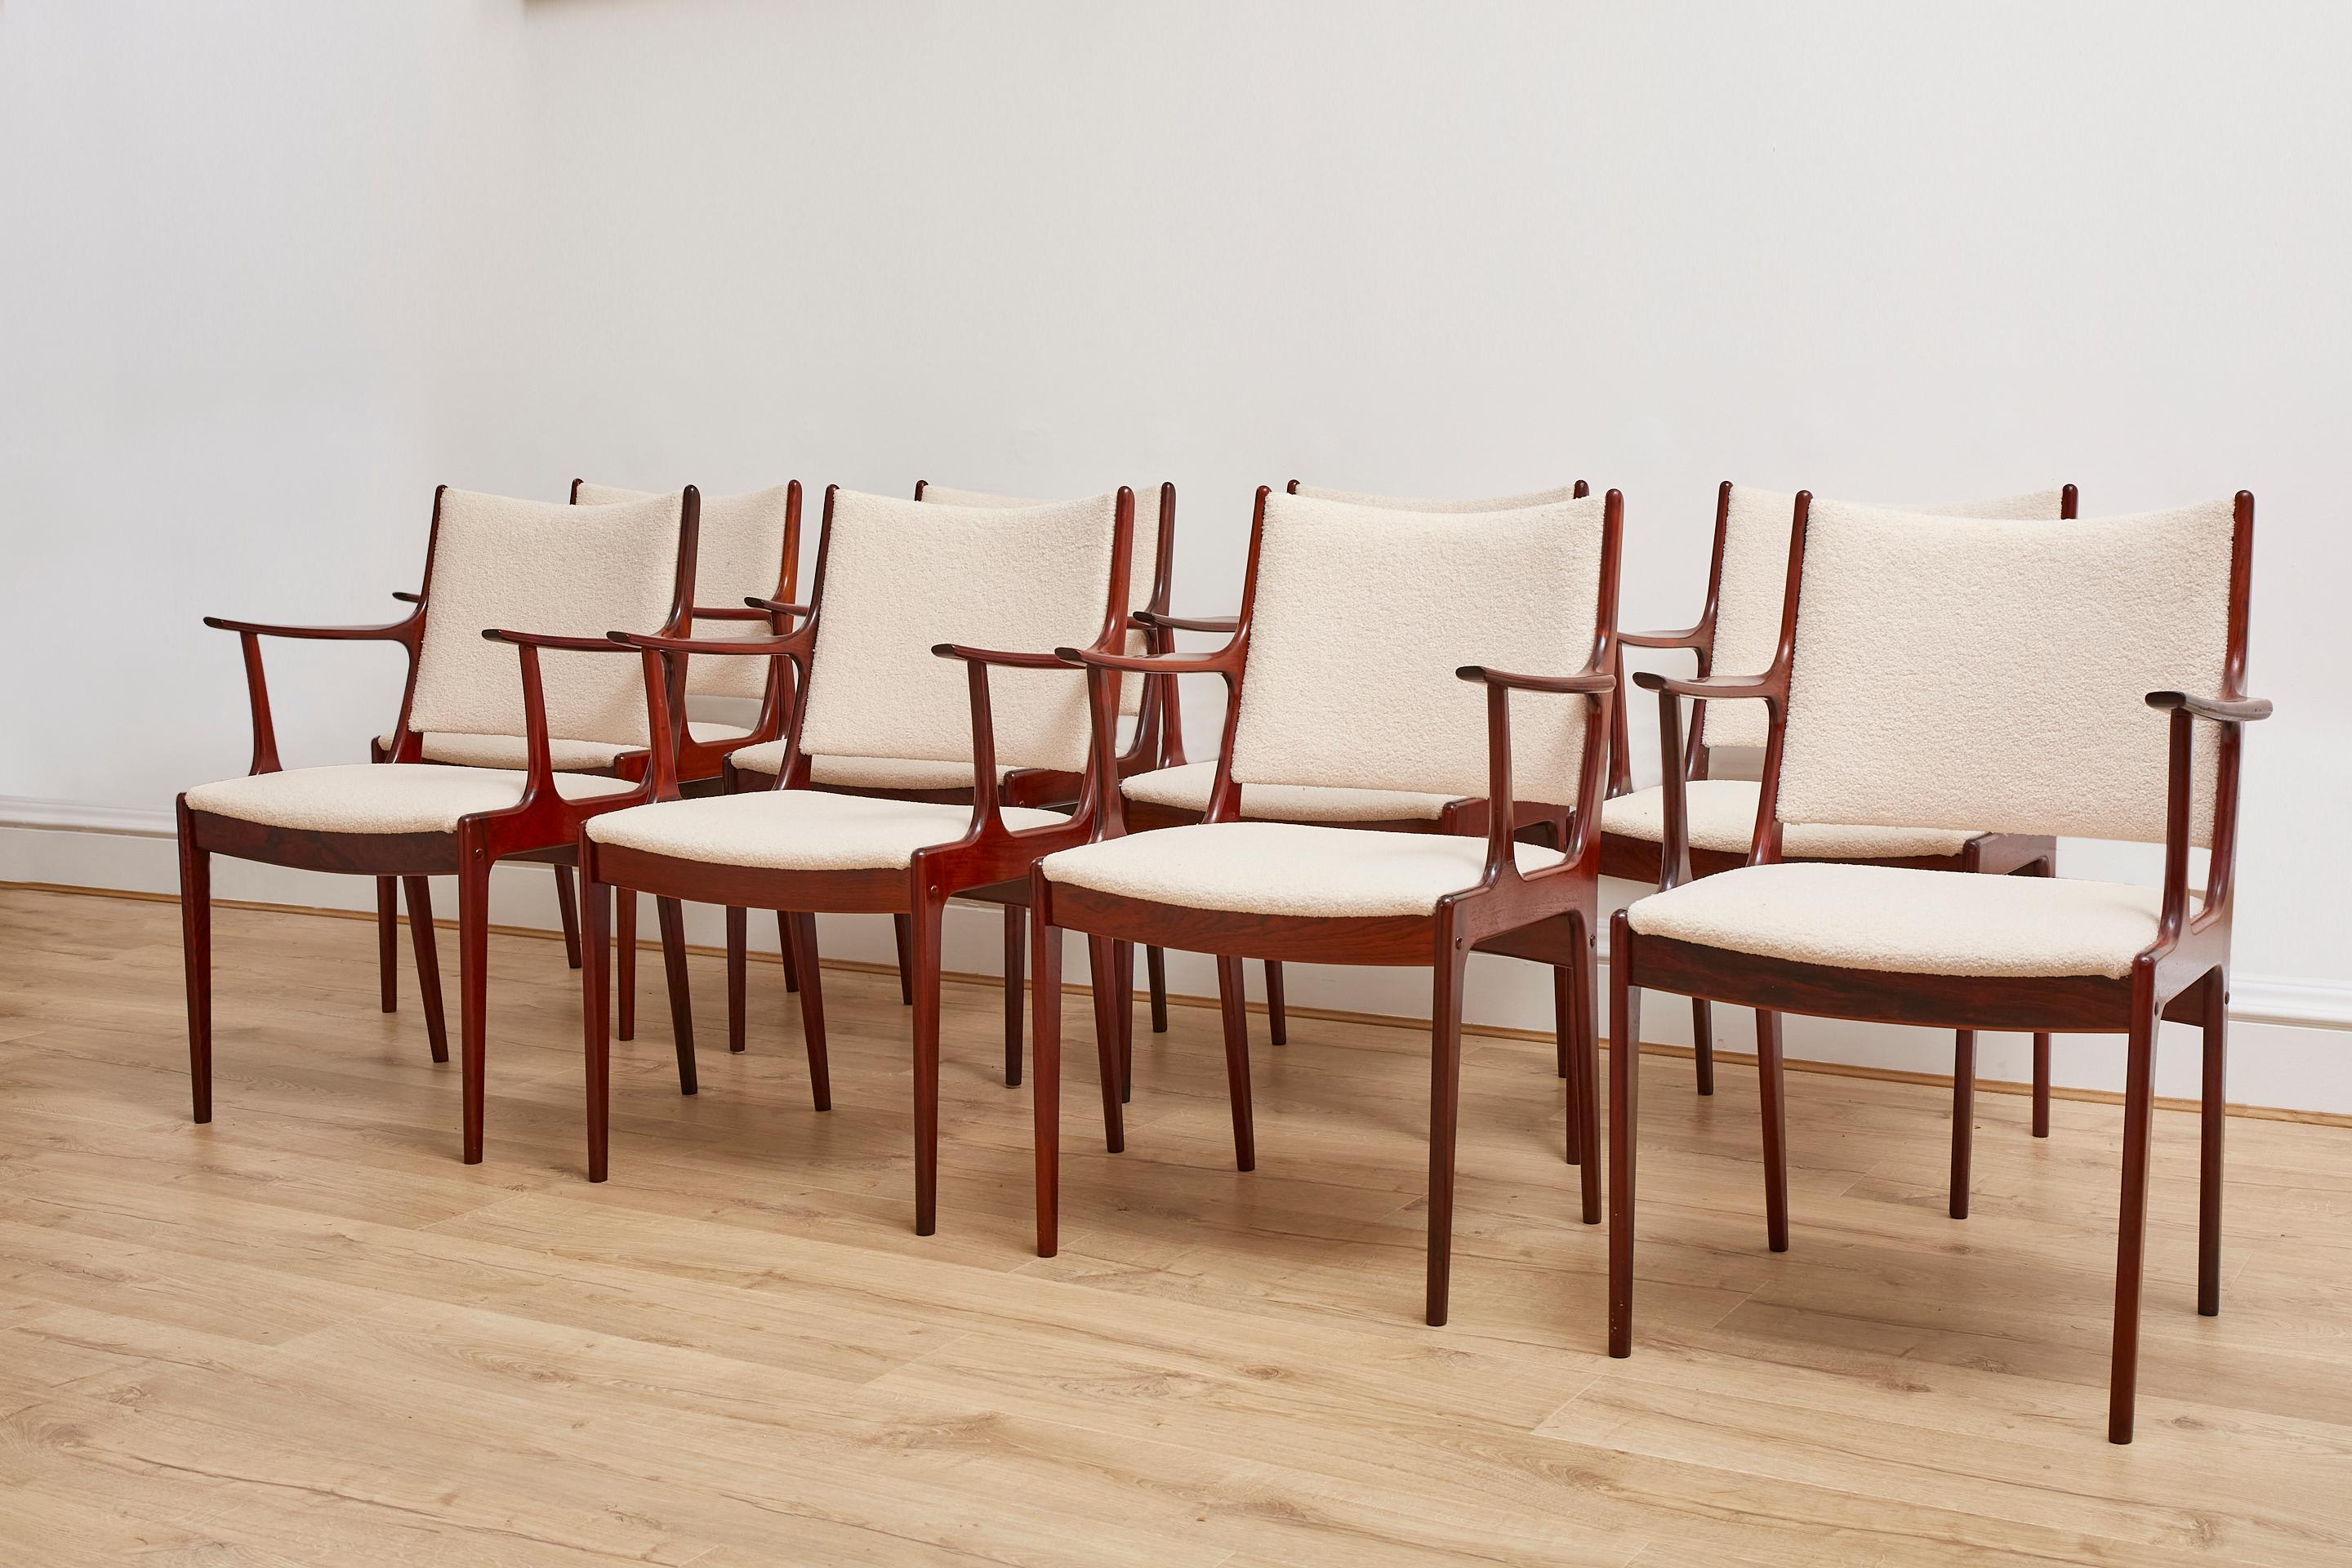 Set of 8 Rosewood Danish dining chairs, 1960s by Johannes Andersen  6